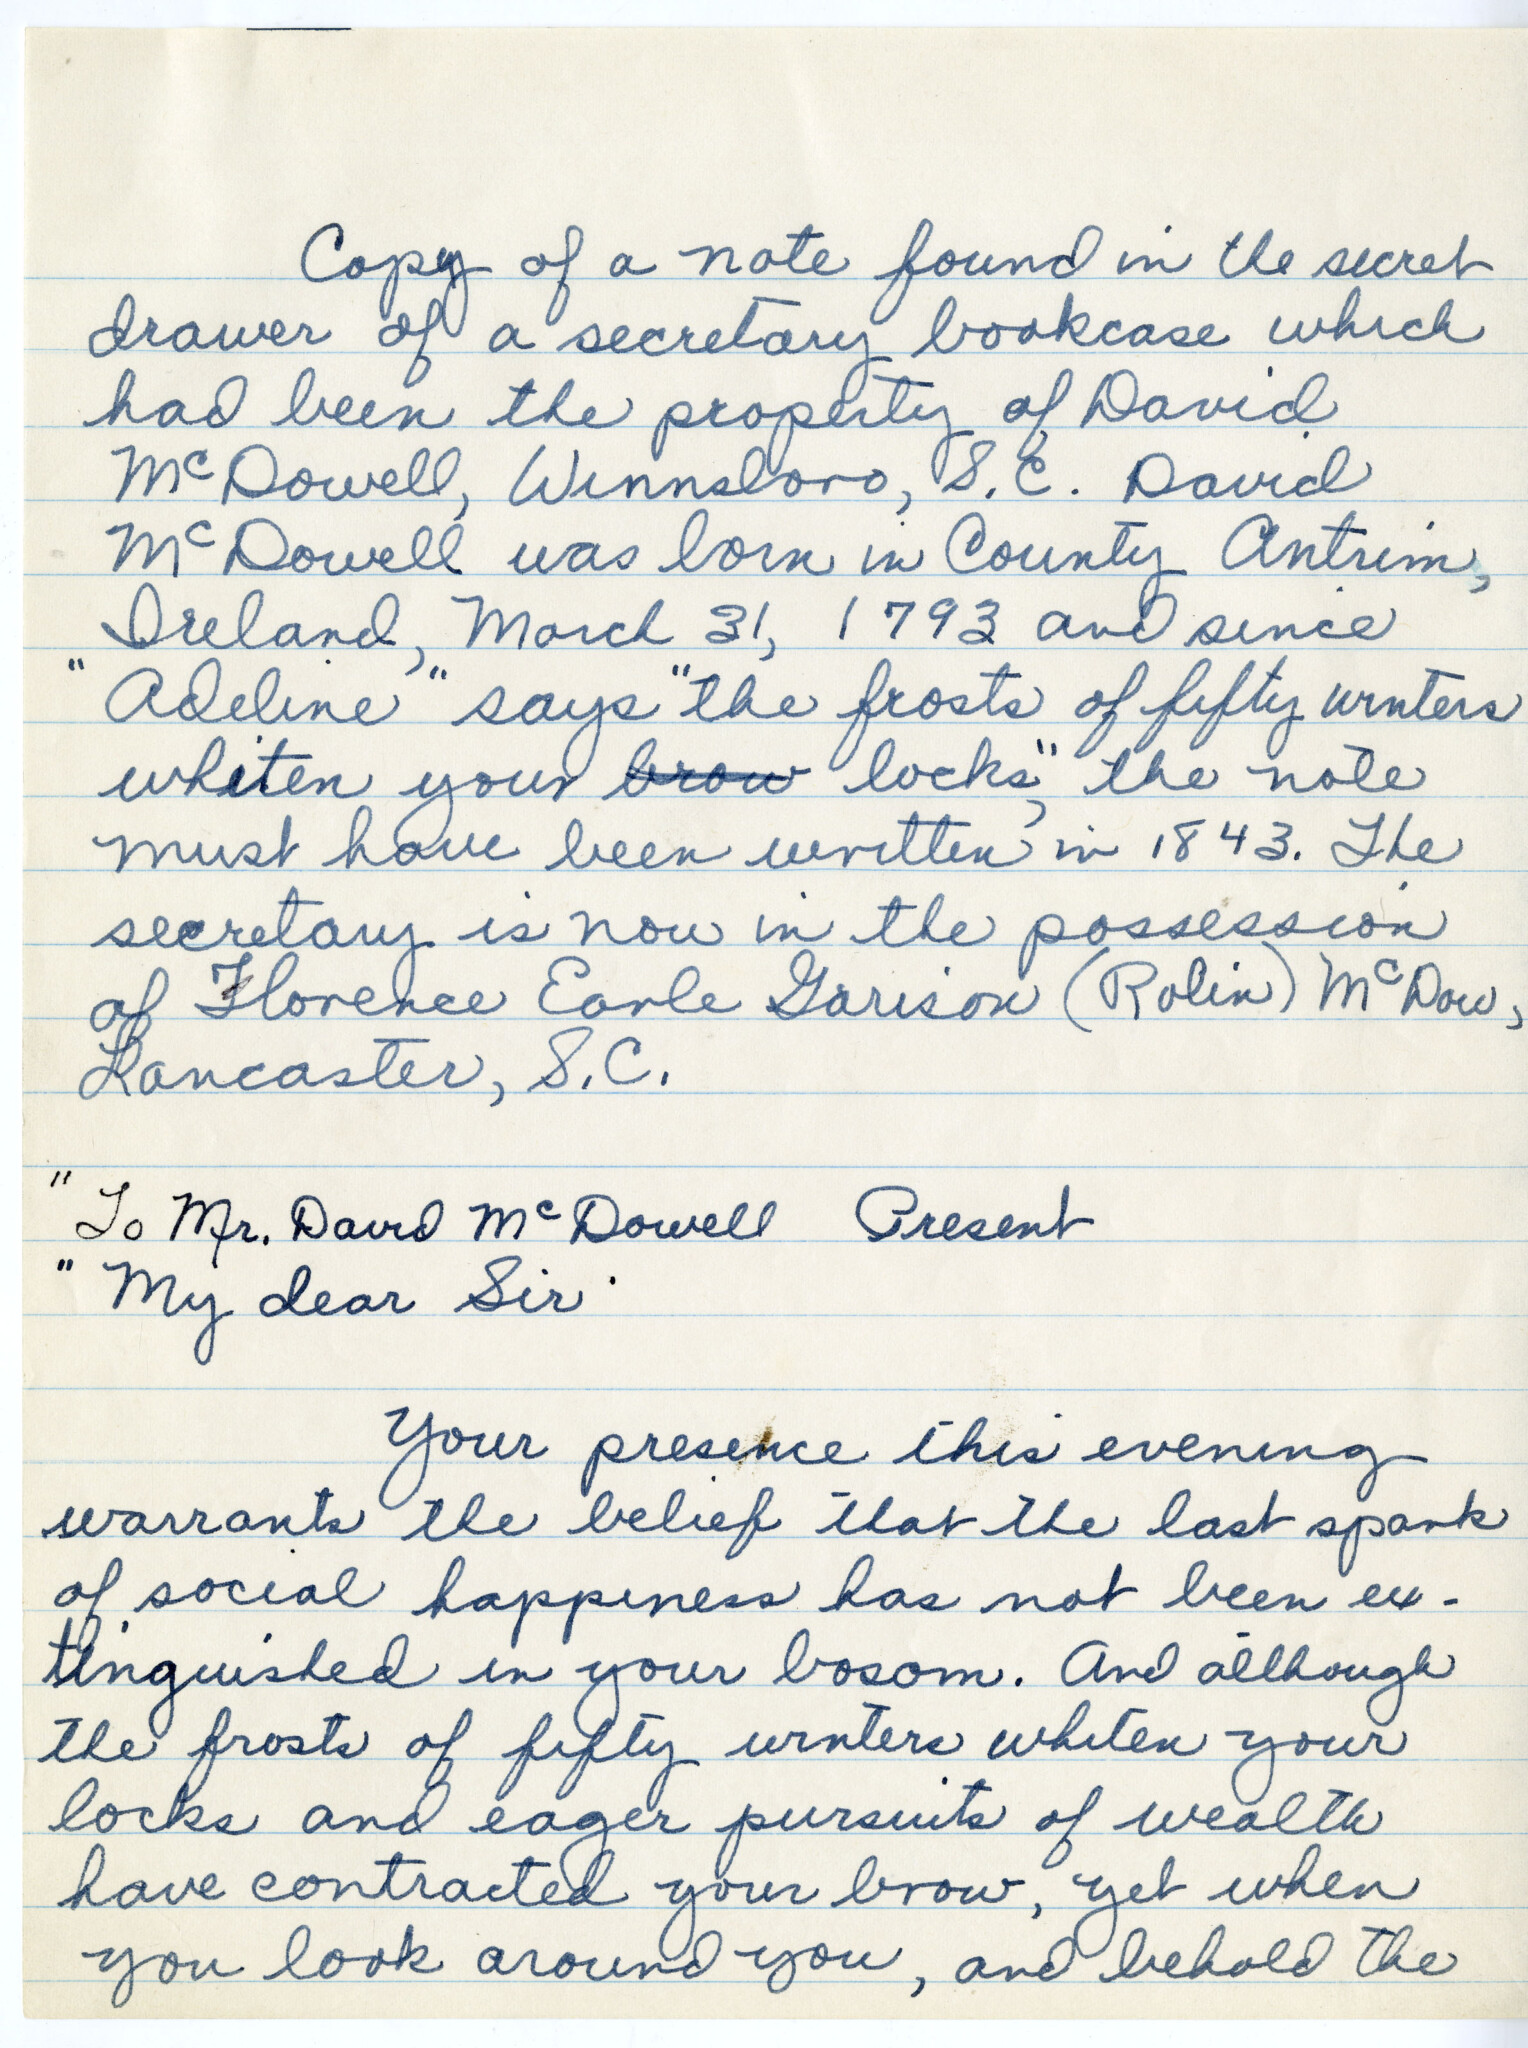 NOTES BY DAVID MCDOWELL OR WINNSBORO, S.C. - WM. B. WHITE, JR. COLLECTION @ WU